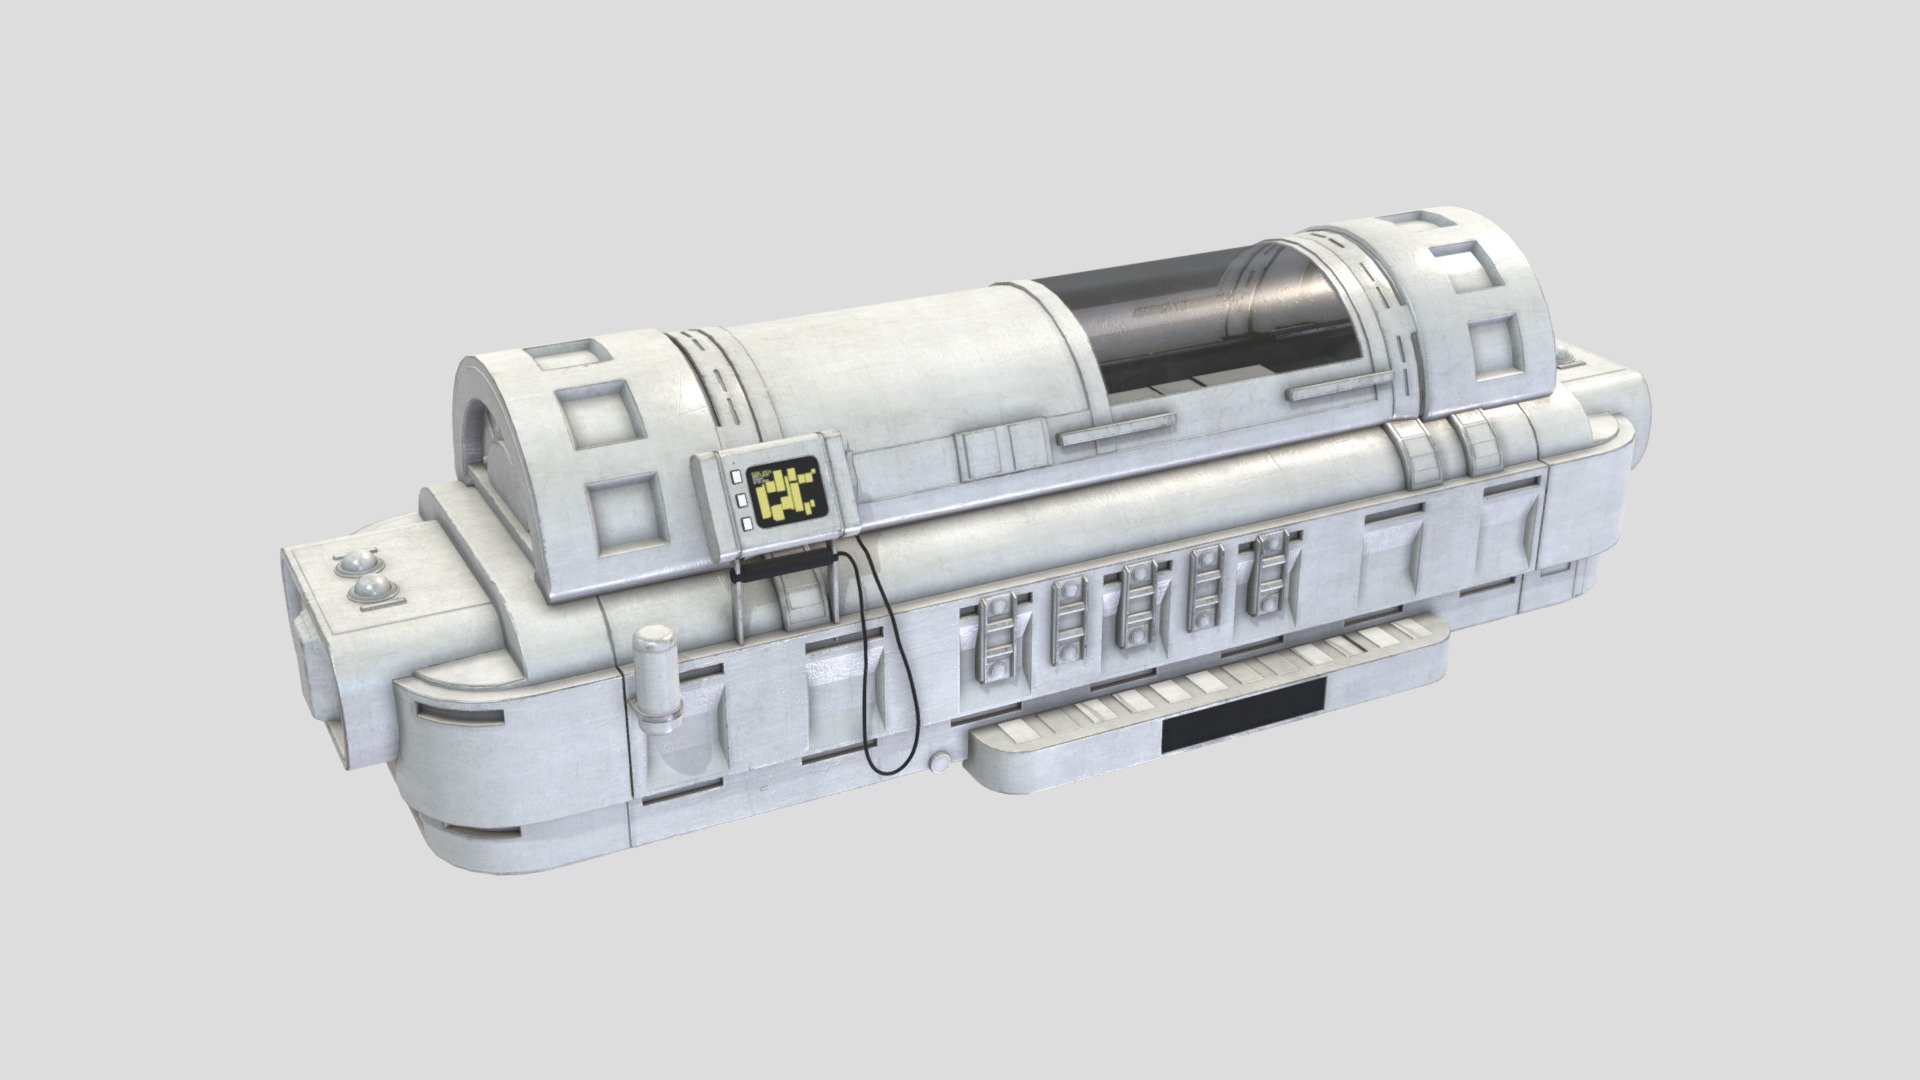 Buy this asset:
https://artstn.co/m/Jrg8g

Model by Kim Murzin from Digital Shipyard team

A portable format of the bacta tank was also available, called the bacta pod. On Tatooine, Boba Fett bathed in his bacta tank at many points in time. He used it to heal his burned scars. After the battle for Mos Espa Fett's bacta tank was used on Cobb Vanth, after he was shot by Cad Bane, while a cyborg modifier was taking care of him.

Model with 4k textures, created in Substance Painter - Boba Fett Bacta Tank - Star Wars - 3D model by DigitalShipyard 3d model